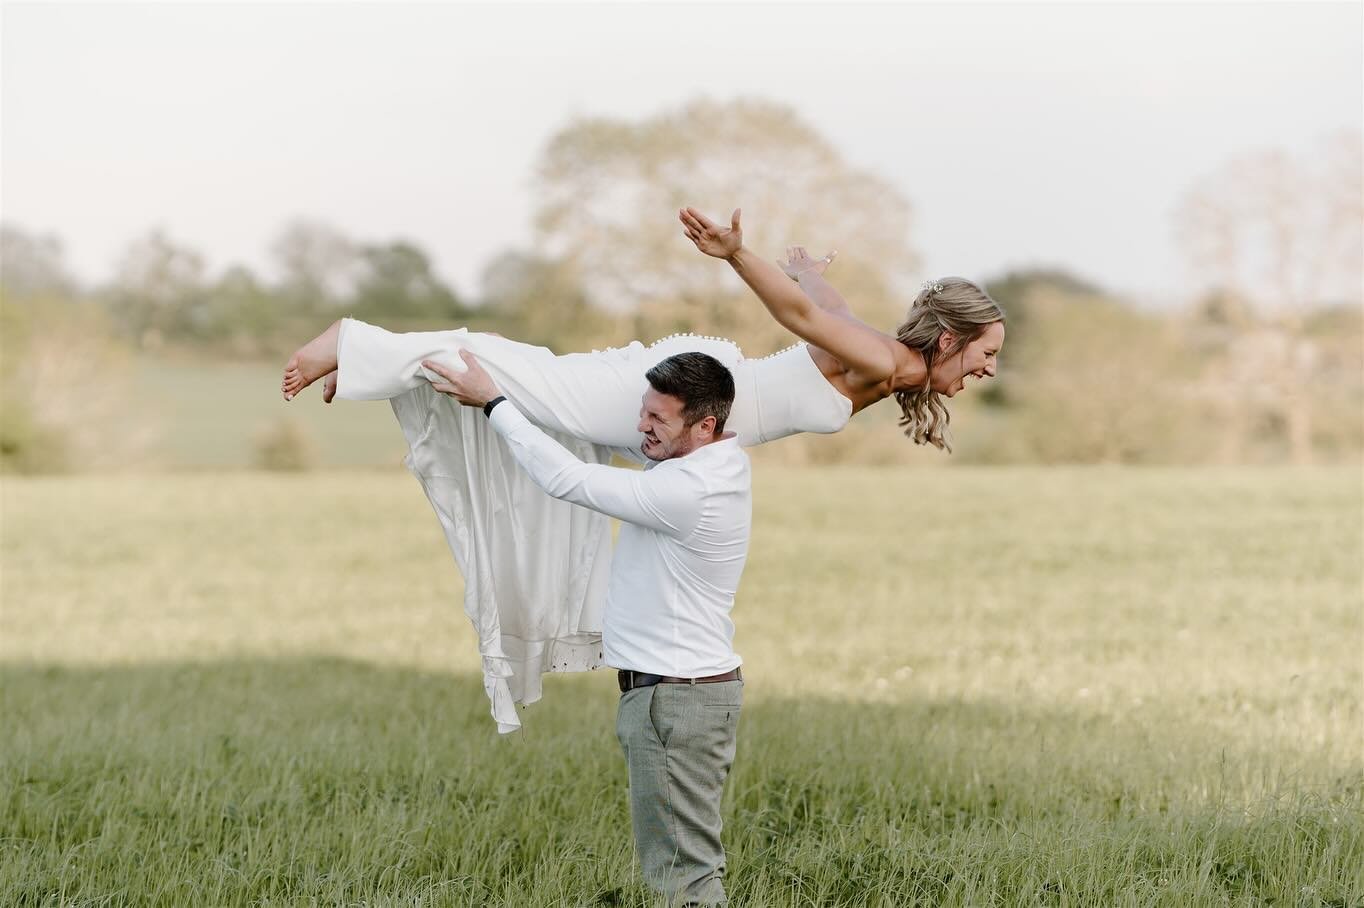 Every wedding I joke about the dirty dancing lift. 
This time I didn&rsquo;t. Didn&rsquo;t even mention it. 

Guess what. 

I GOT IT. 

I shared the teaser film from @annaconen &amp; @willyfarm87 the other day but now its time for some pics. I&rsquo;